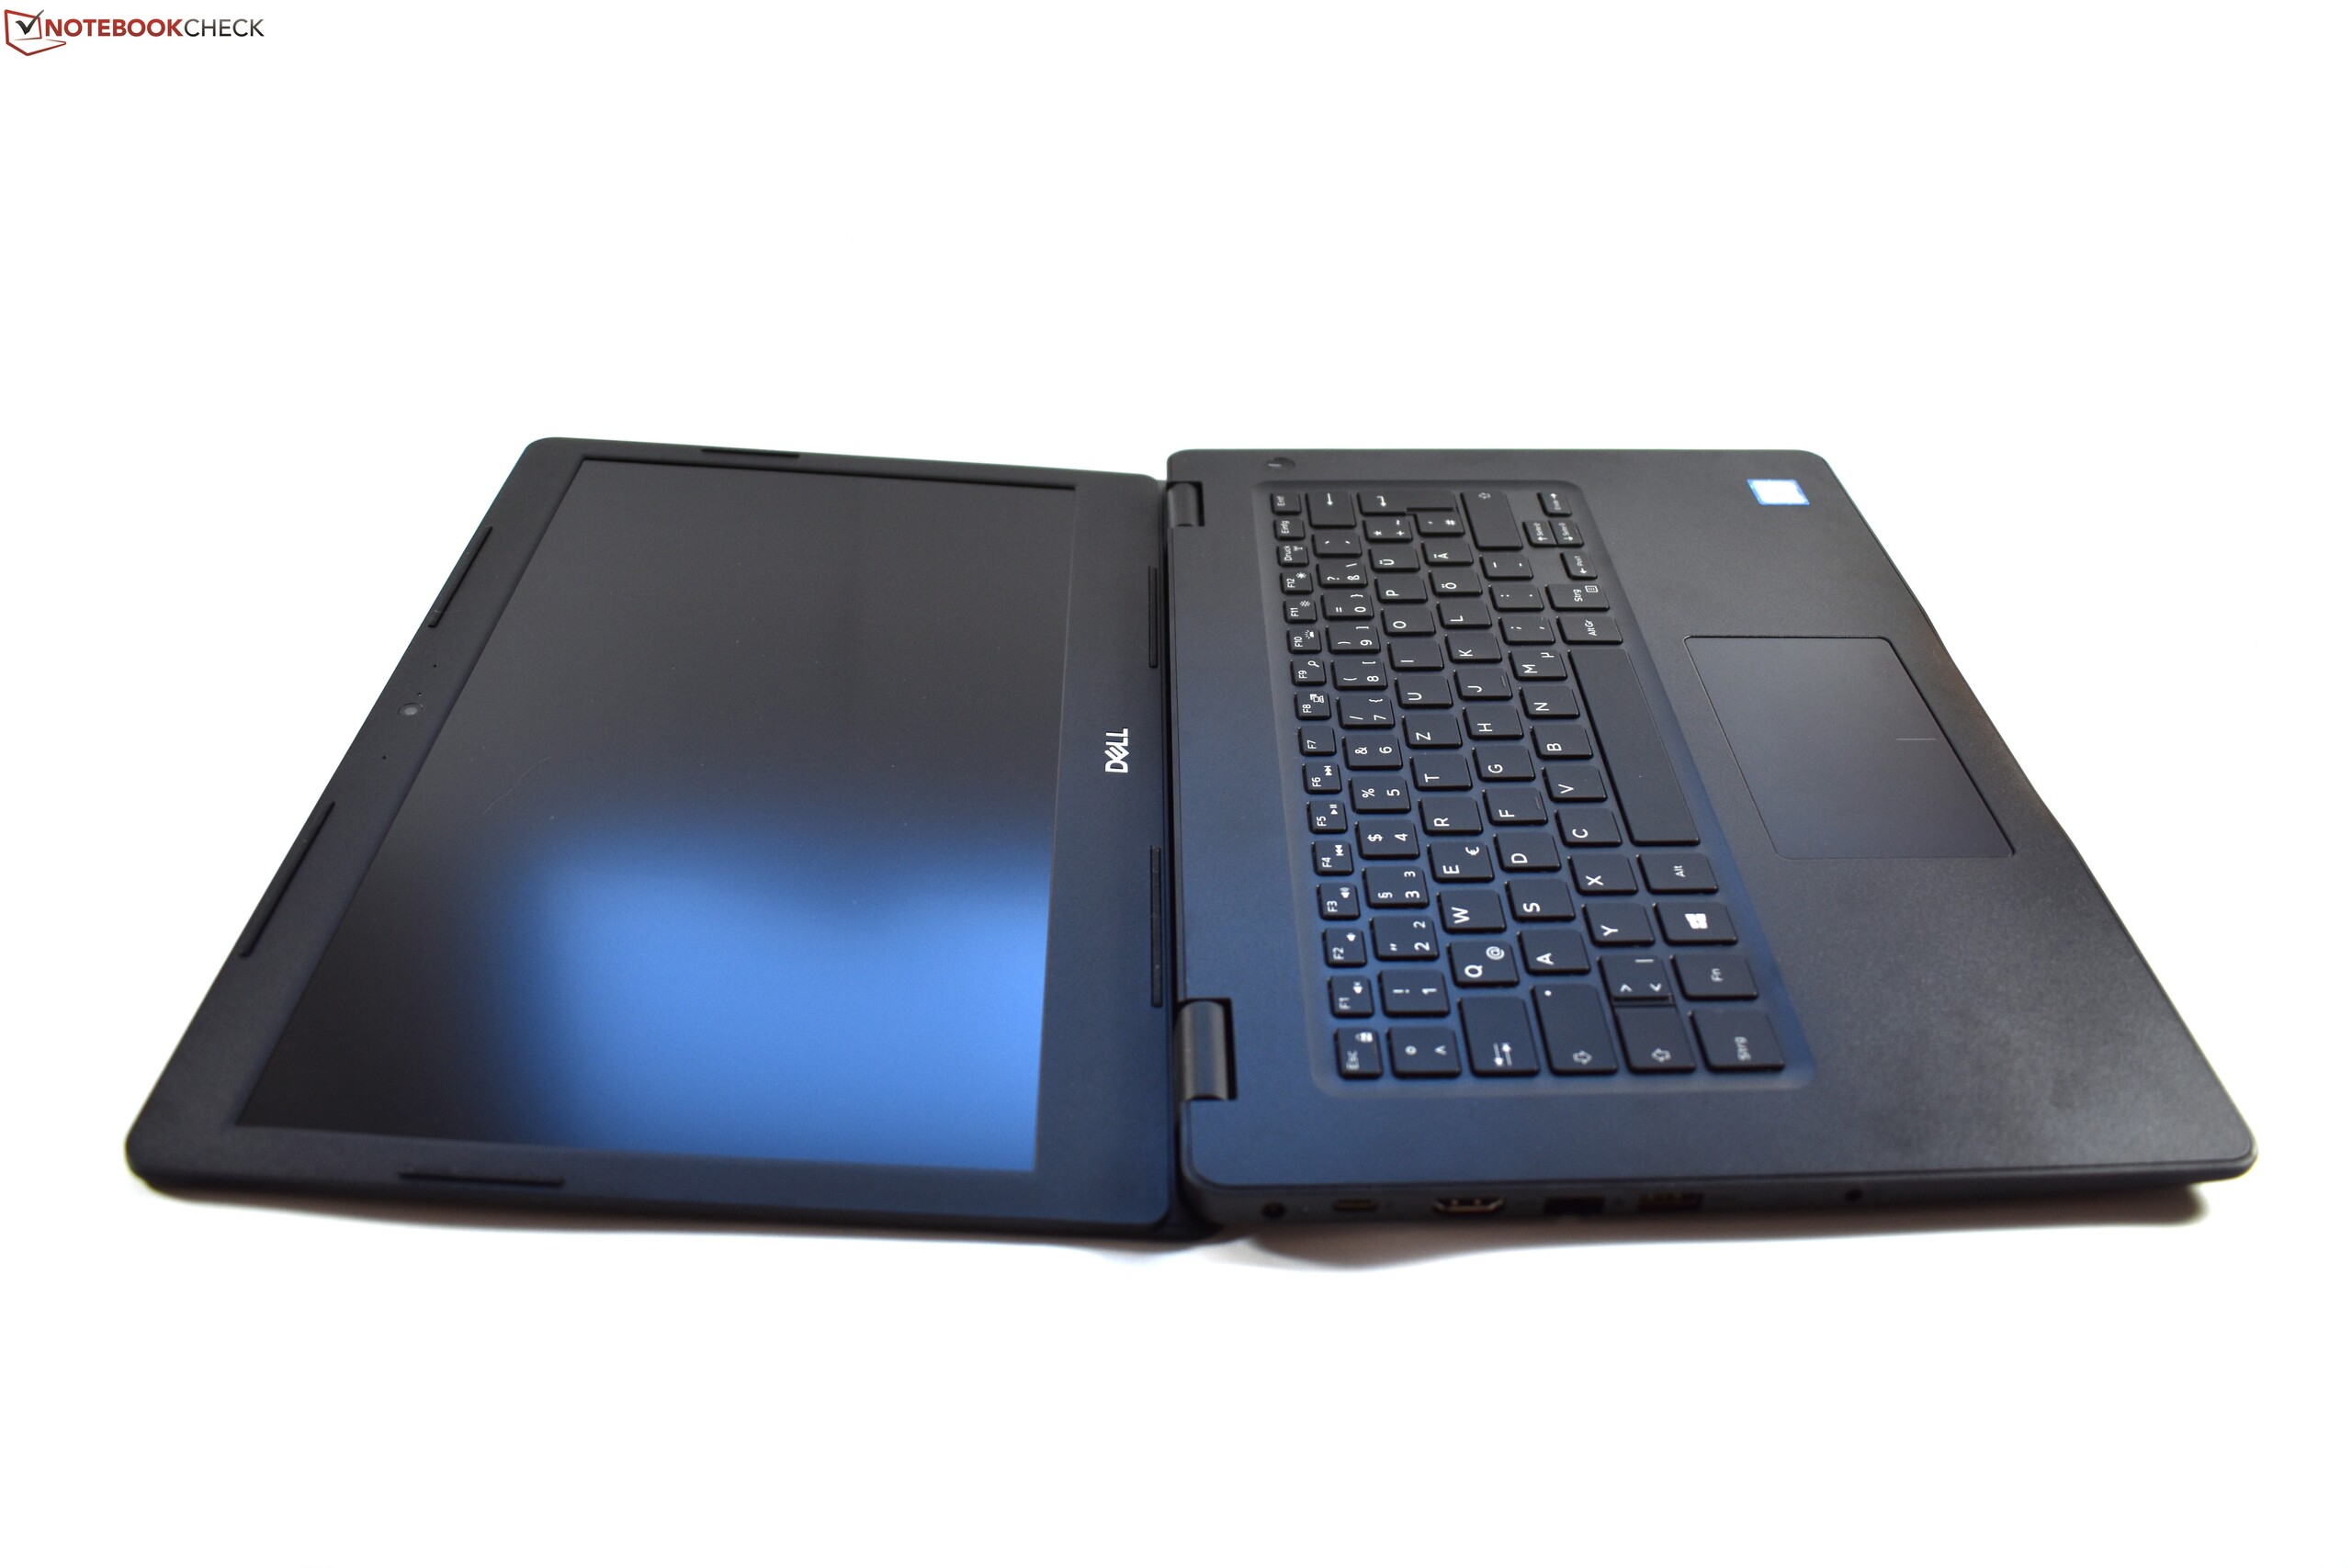 Dell Latitude 3490 (Core i5, FHD) Laptop Review  Reviews